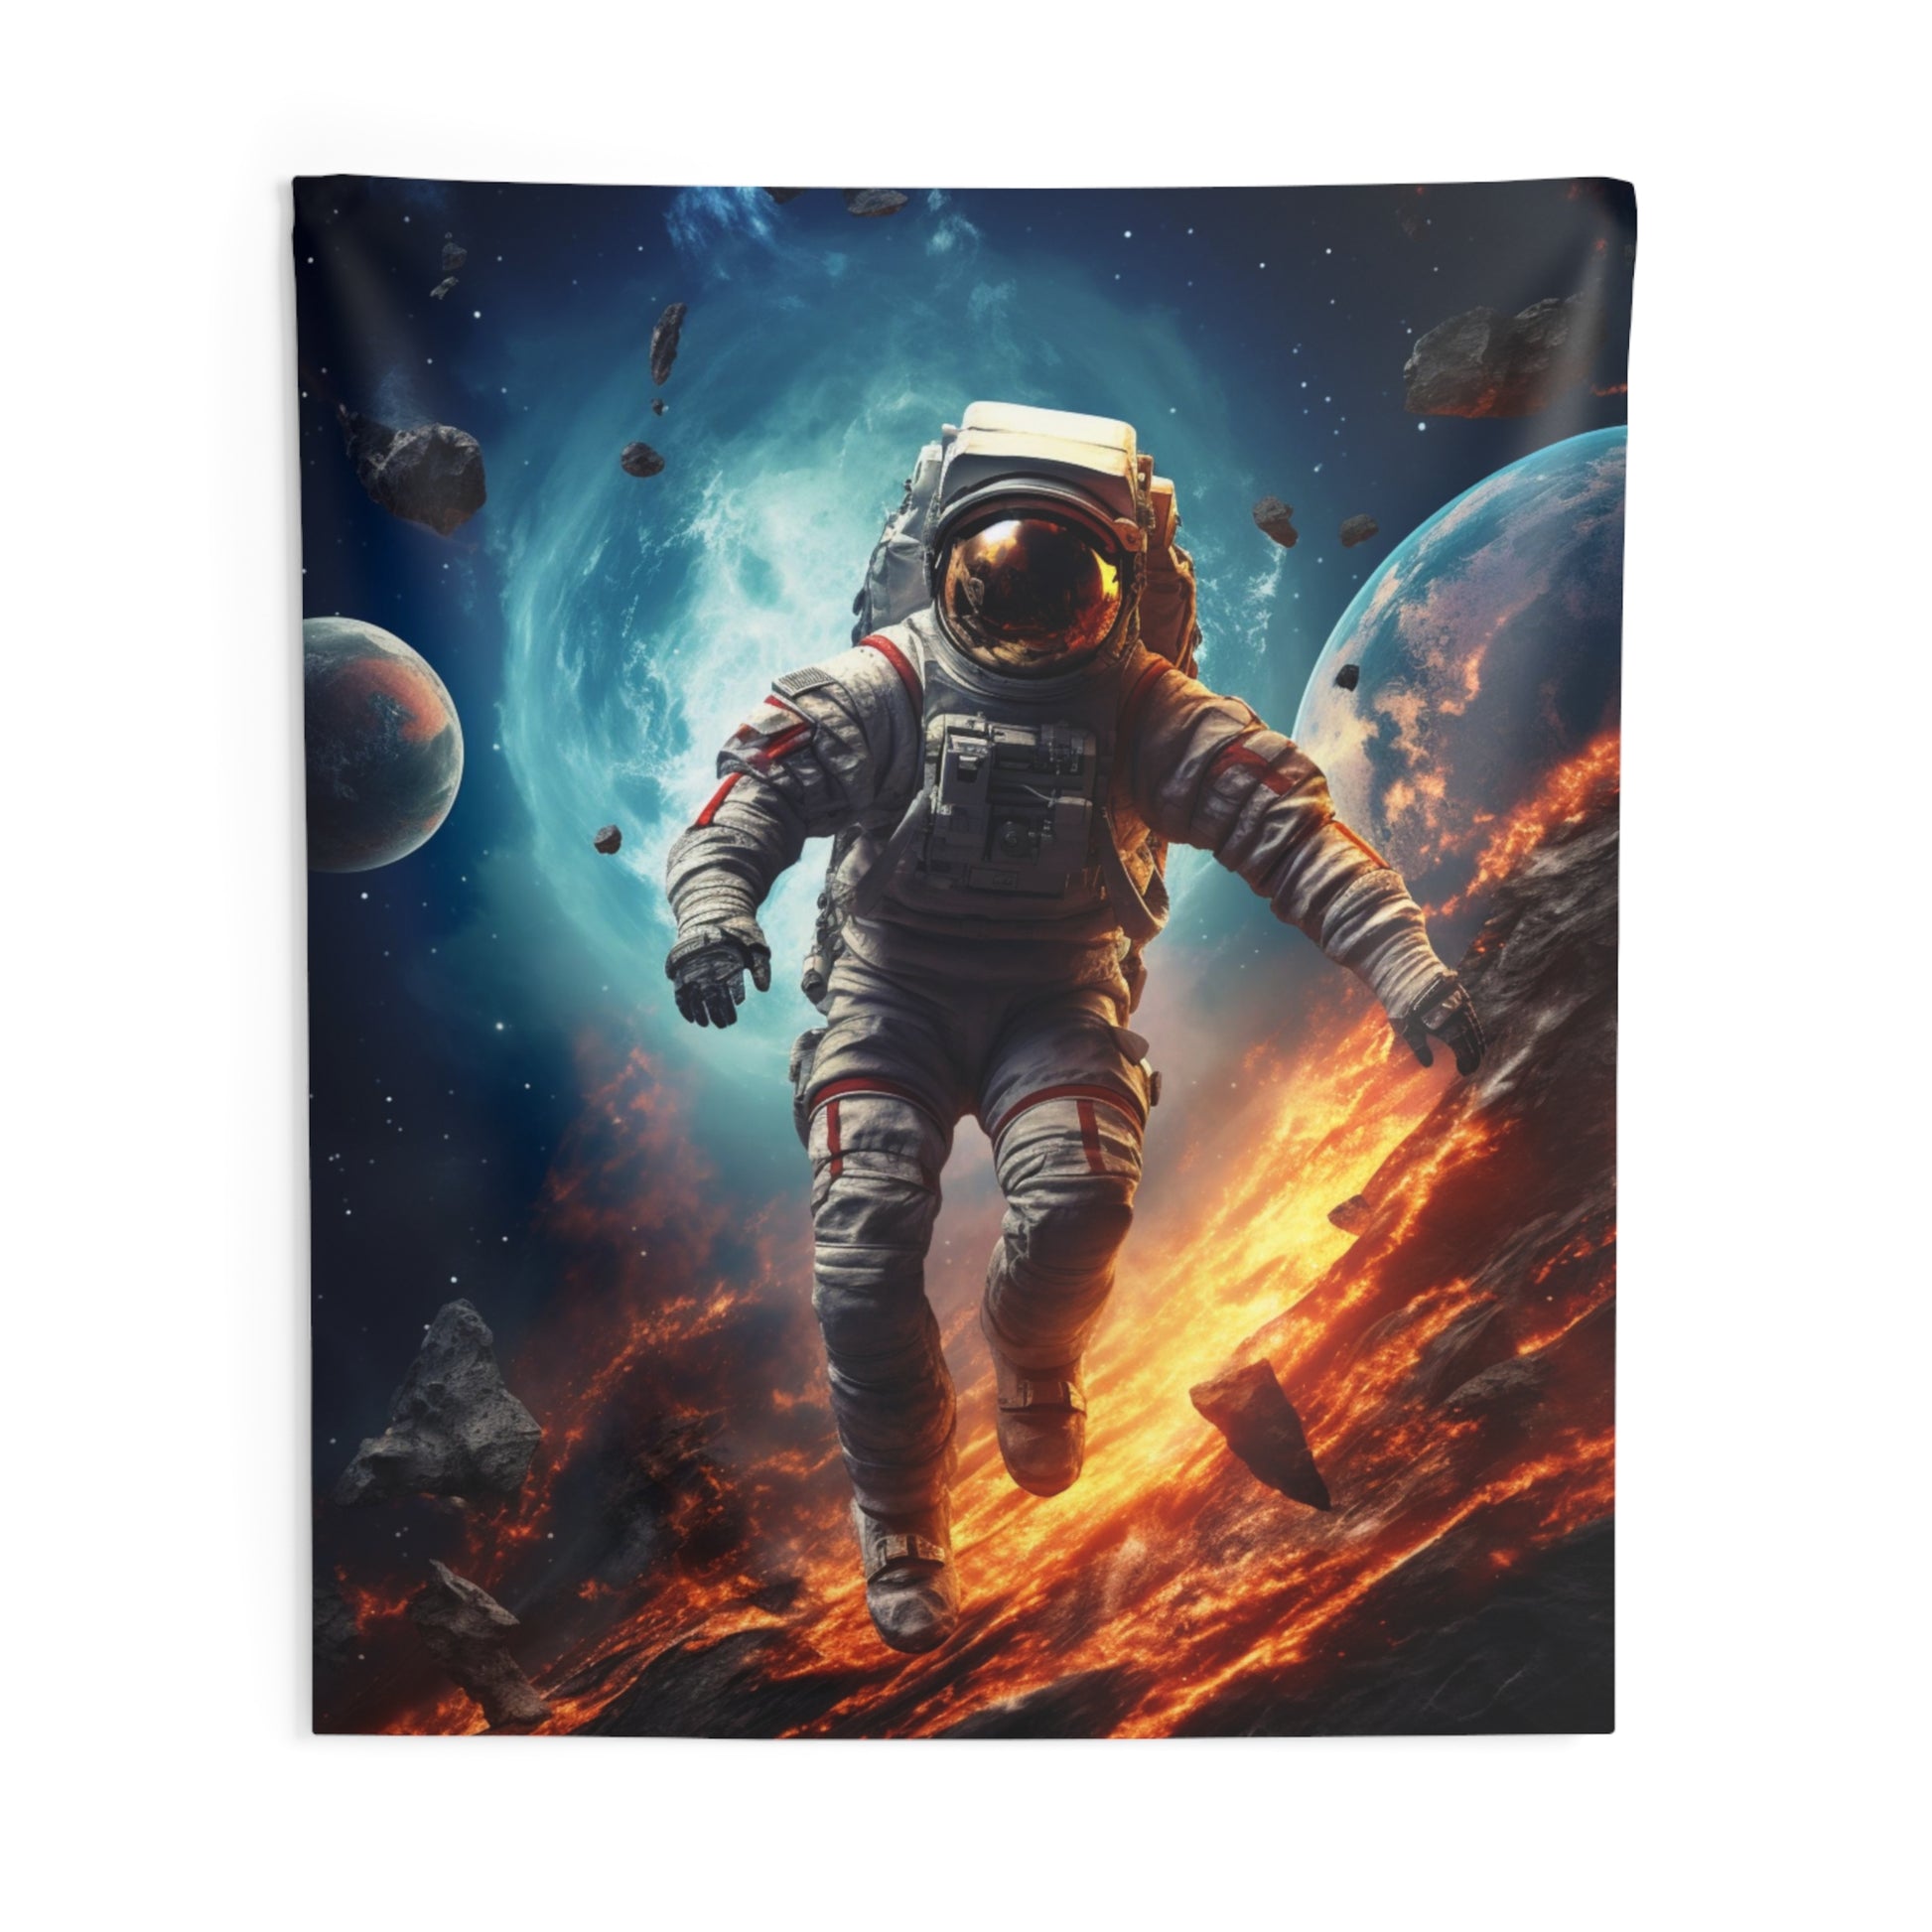 Astronaut Tapestry, Galaxy Outer Space Planets Wall Art Hanging Cool Unique Vertical Aesthetic Large Small Decor Bedroom College Dorm Room Starcove Fashion